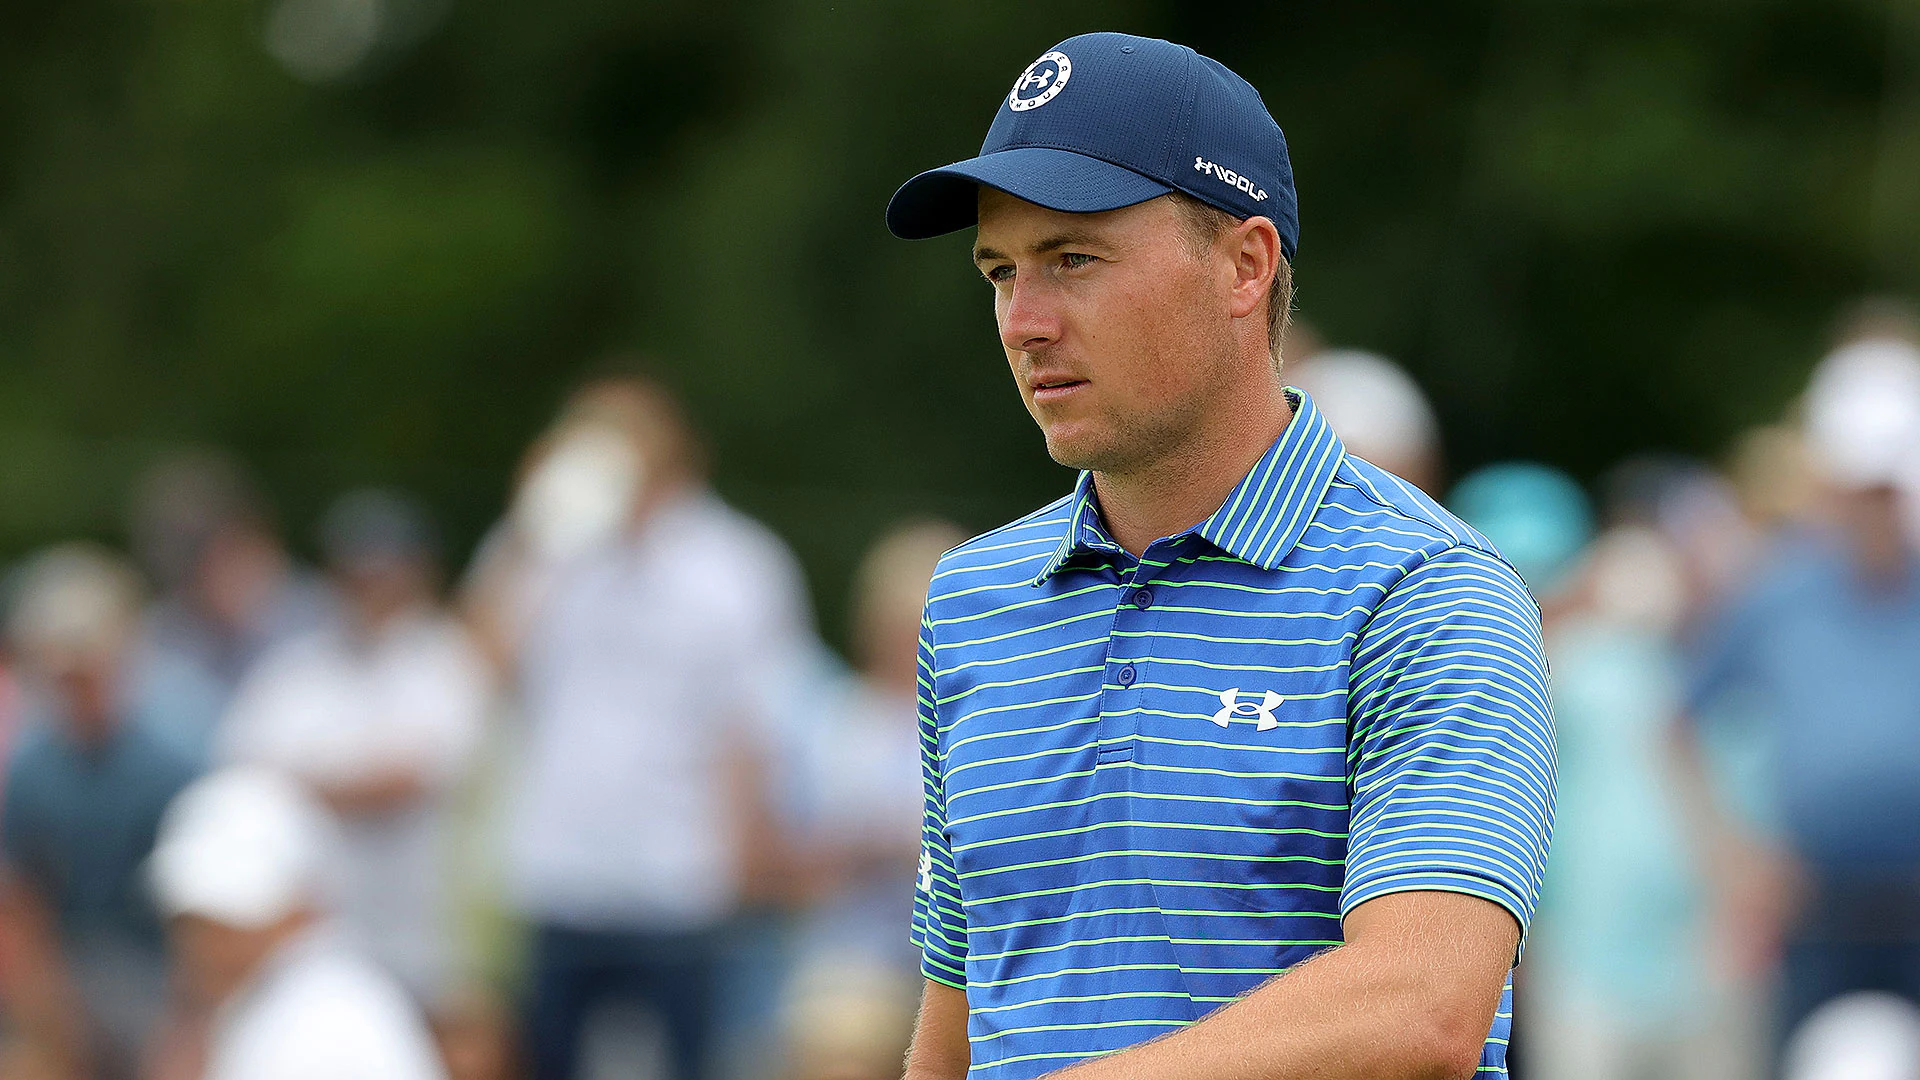 Watch: Jordan Spieth plays himself back into Northern Trust contention